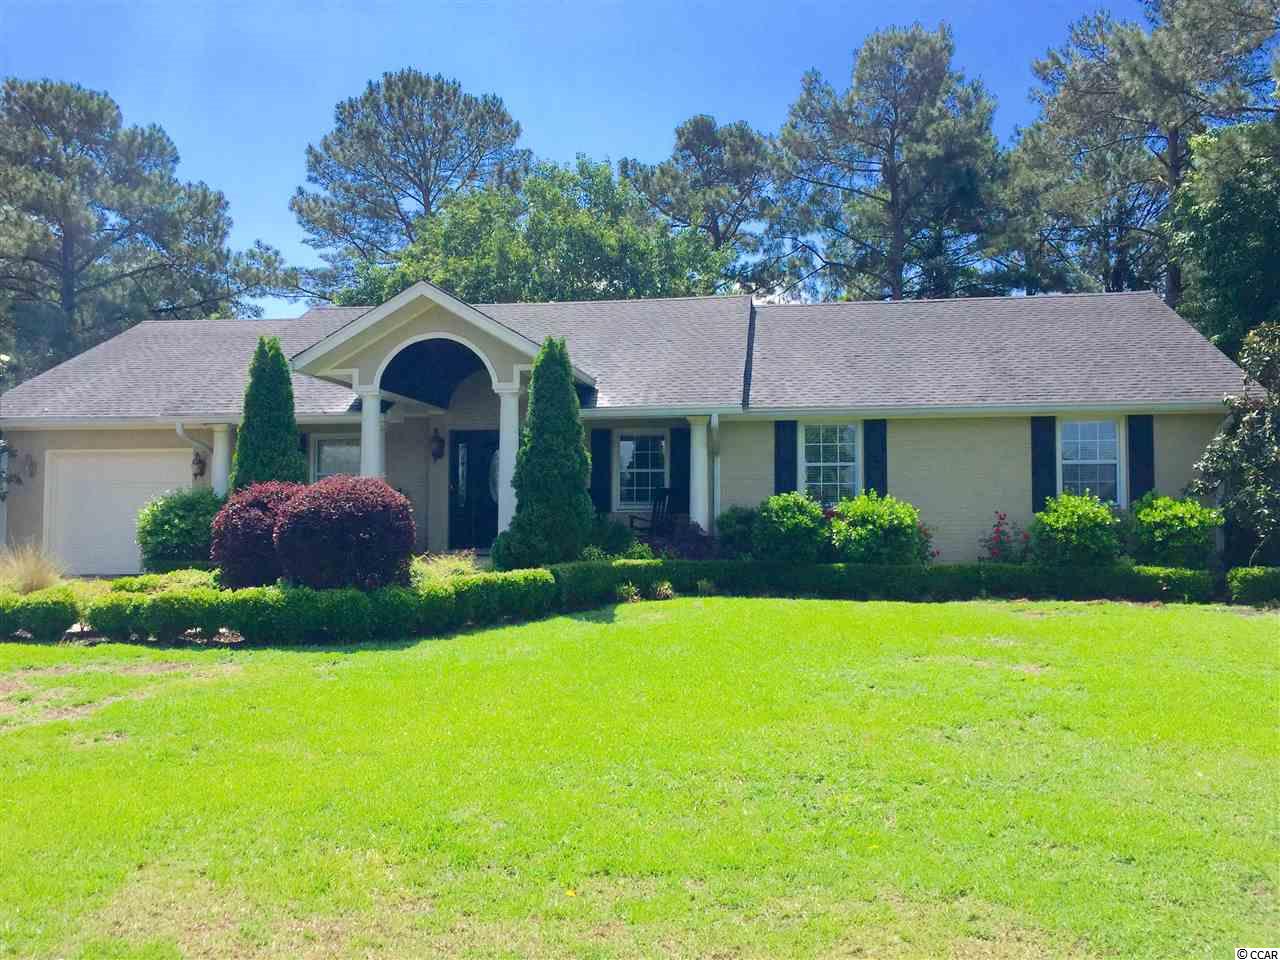 3821 Hobcaw Dr. Myrtle Beach, SC 29577